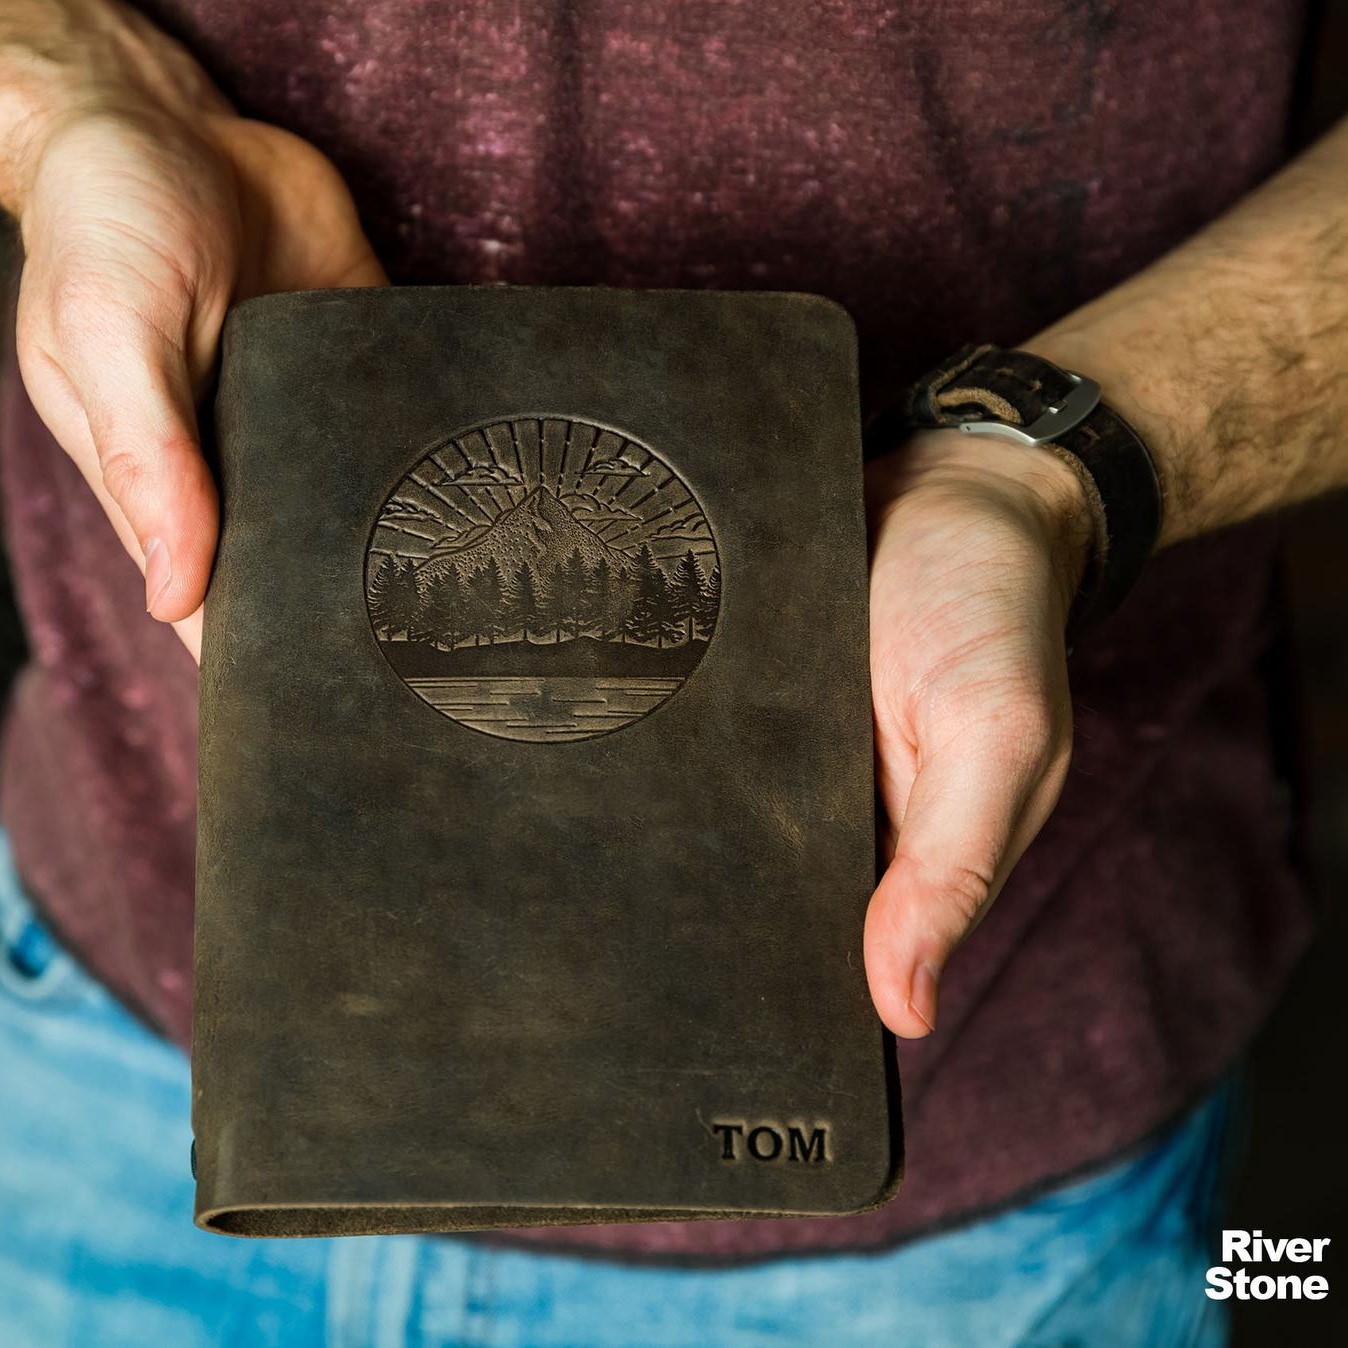 Father's Day gift for outdoorsy dad - Leather hiking journal